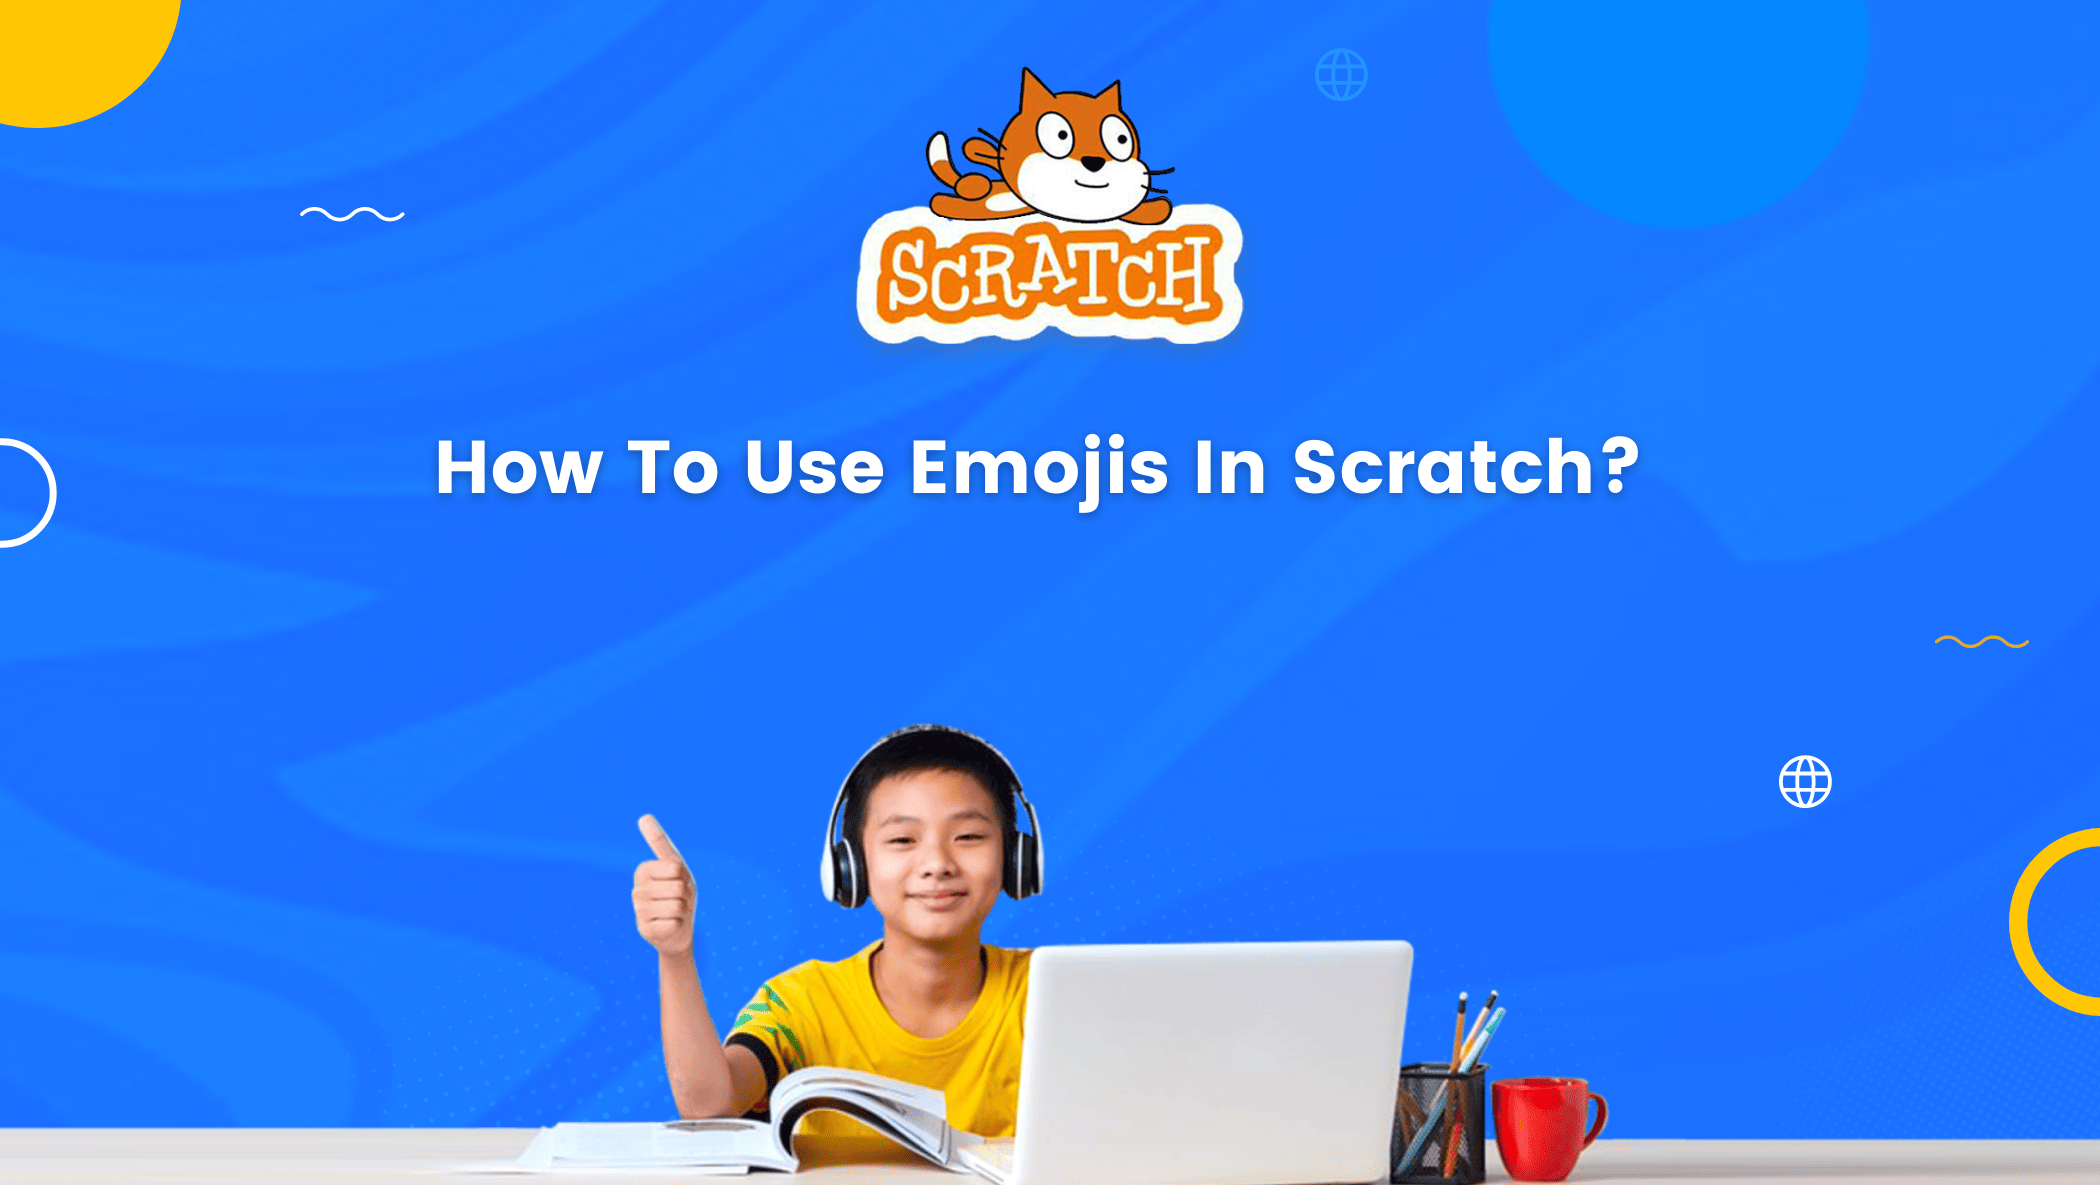 How To Use Emojis In Scratch